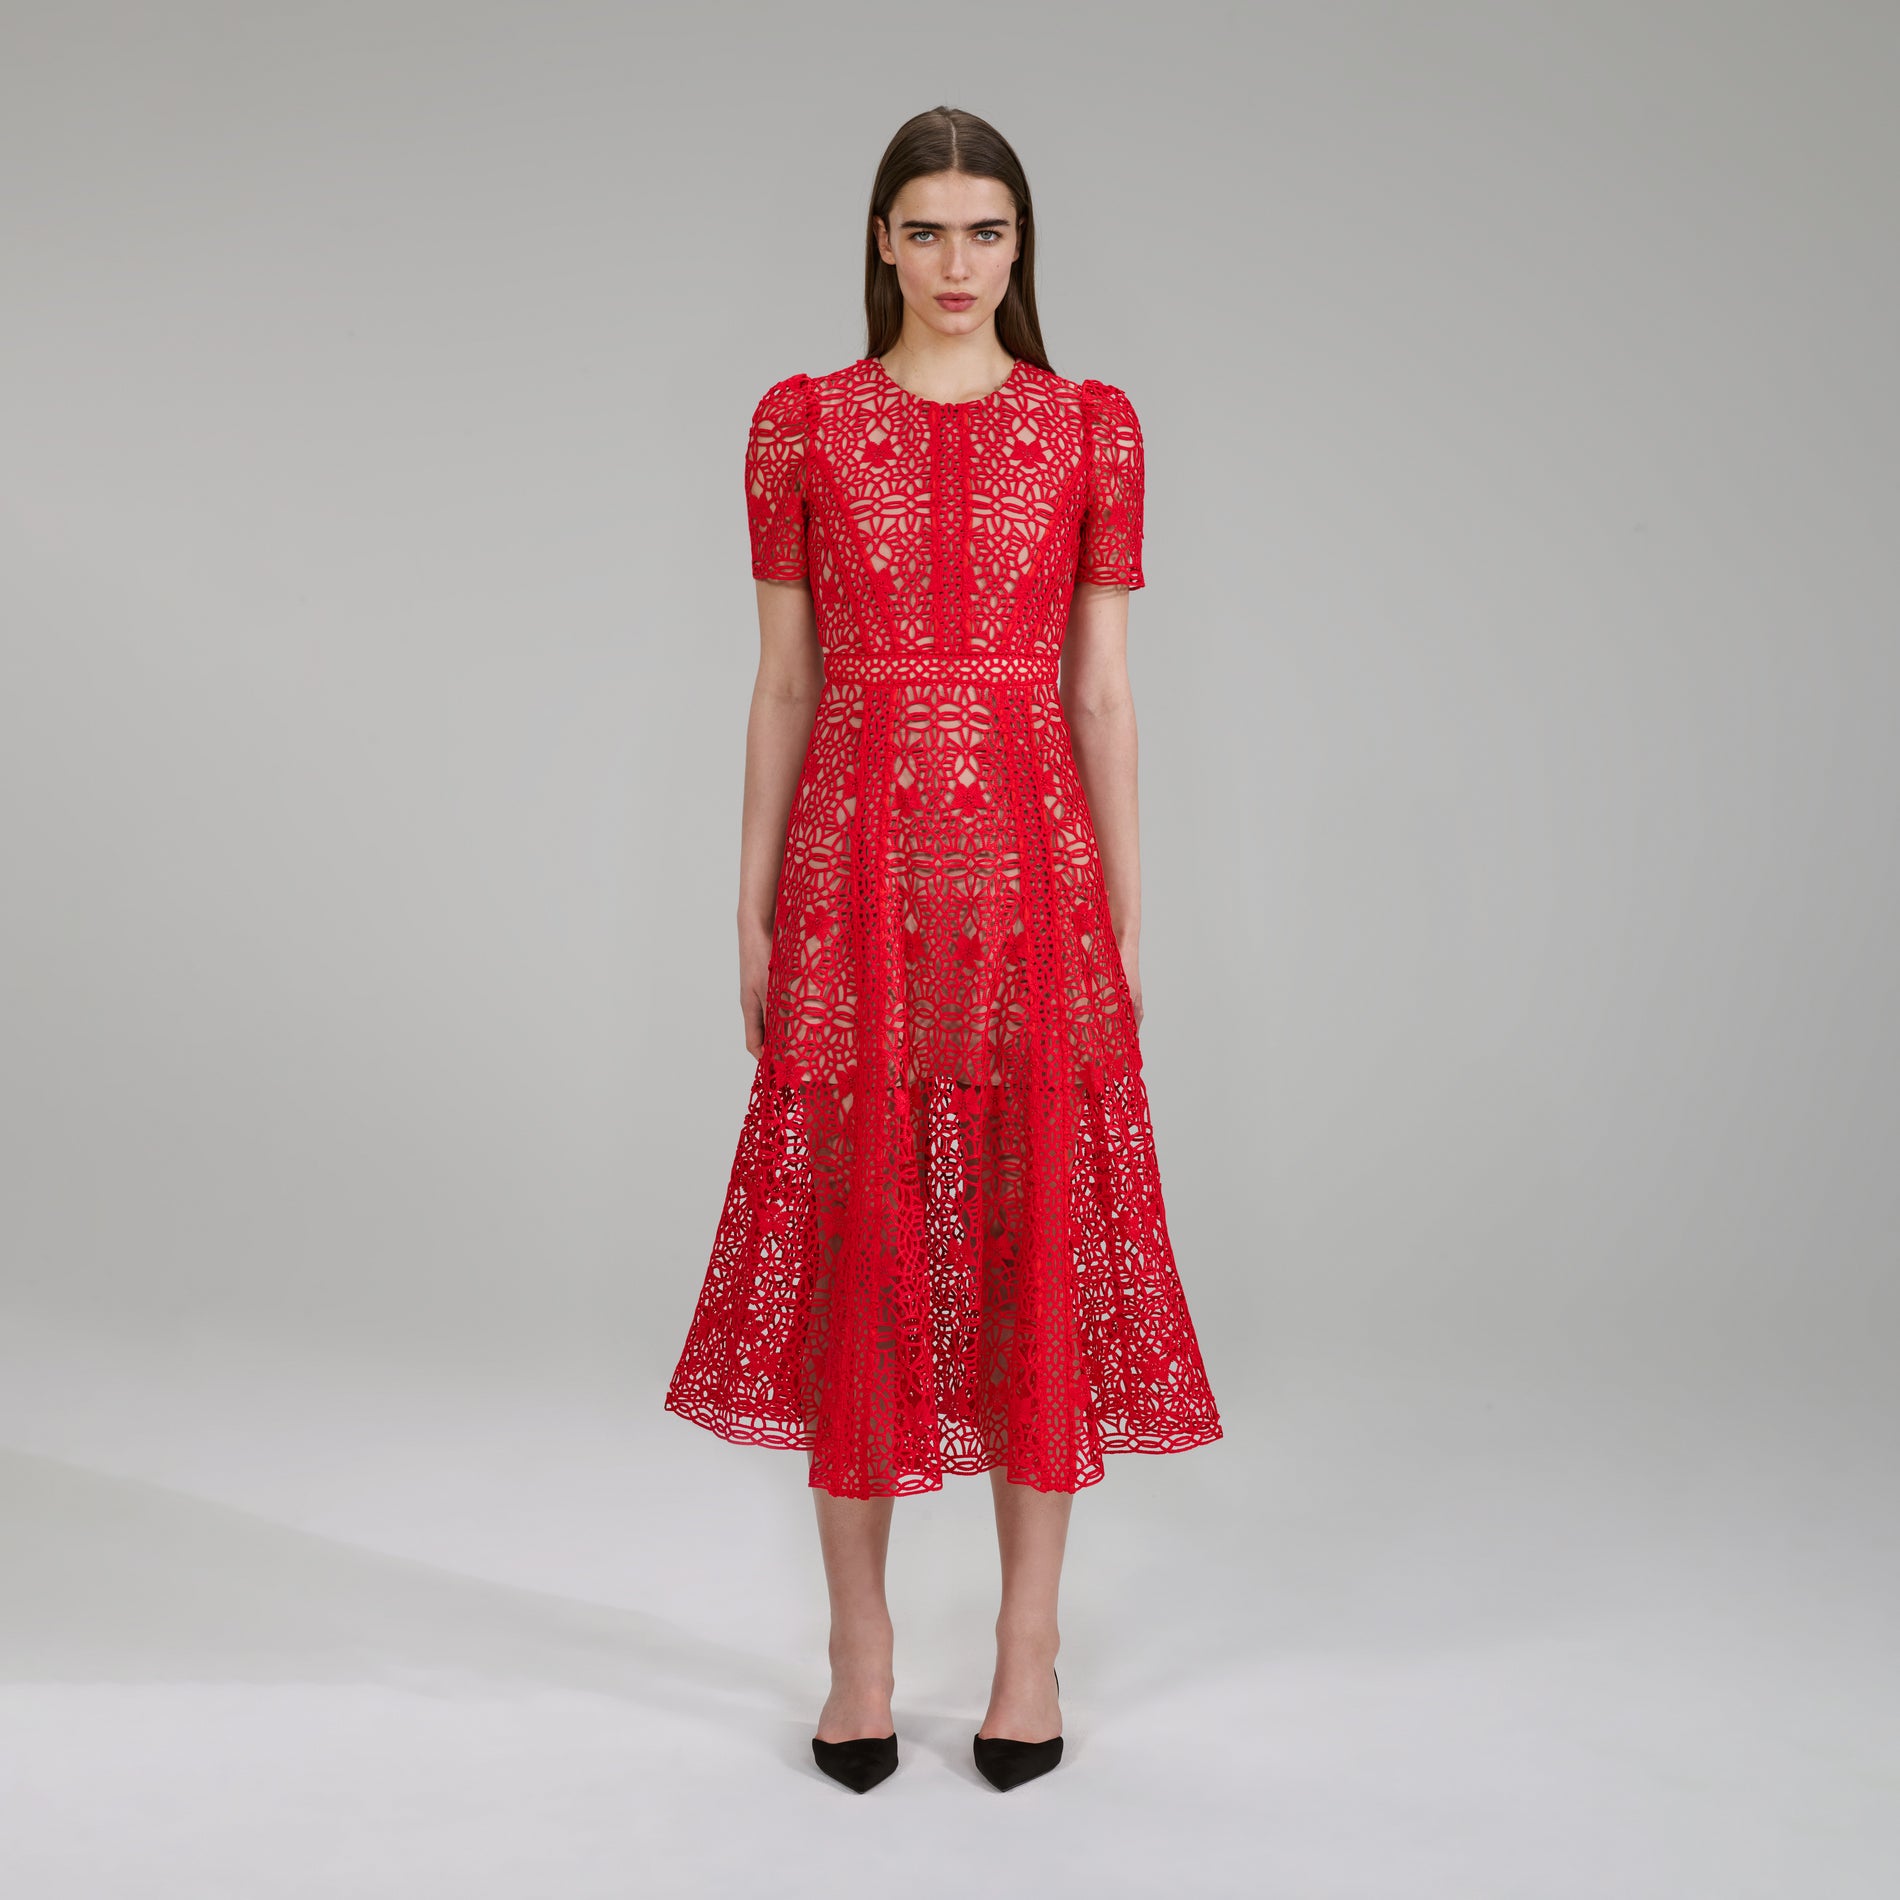 A woman wearing the Red Guipure Lace Midi Dress